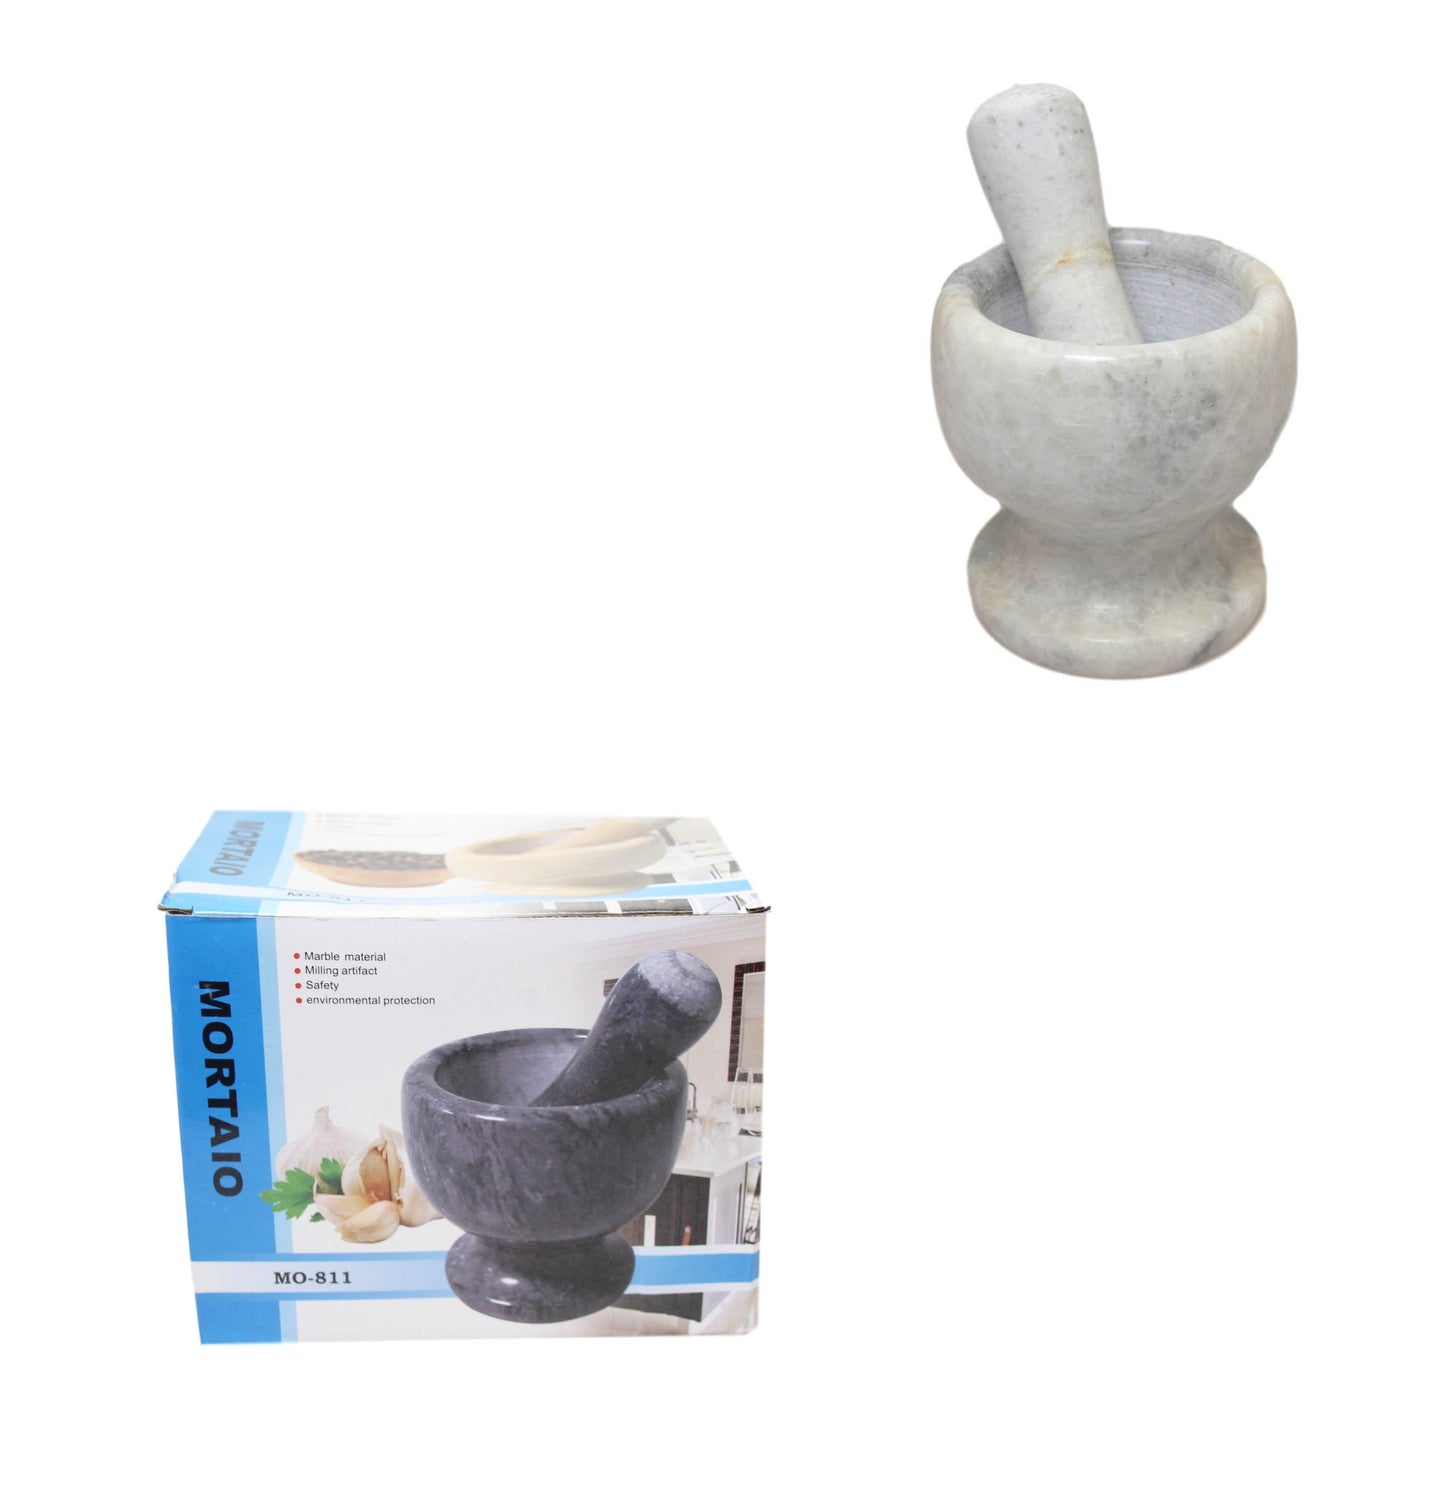 Pestle and Mortar Set Garlic Herb Spice Resin Mixing Grinding Crusher Bowl 6230 (Parcel Rate)